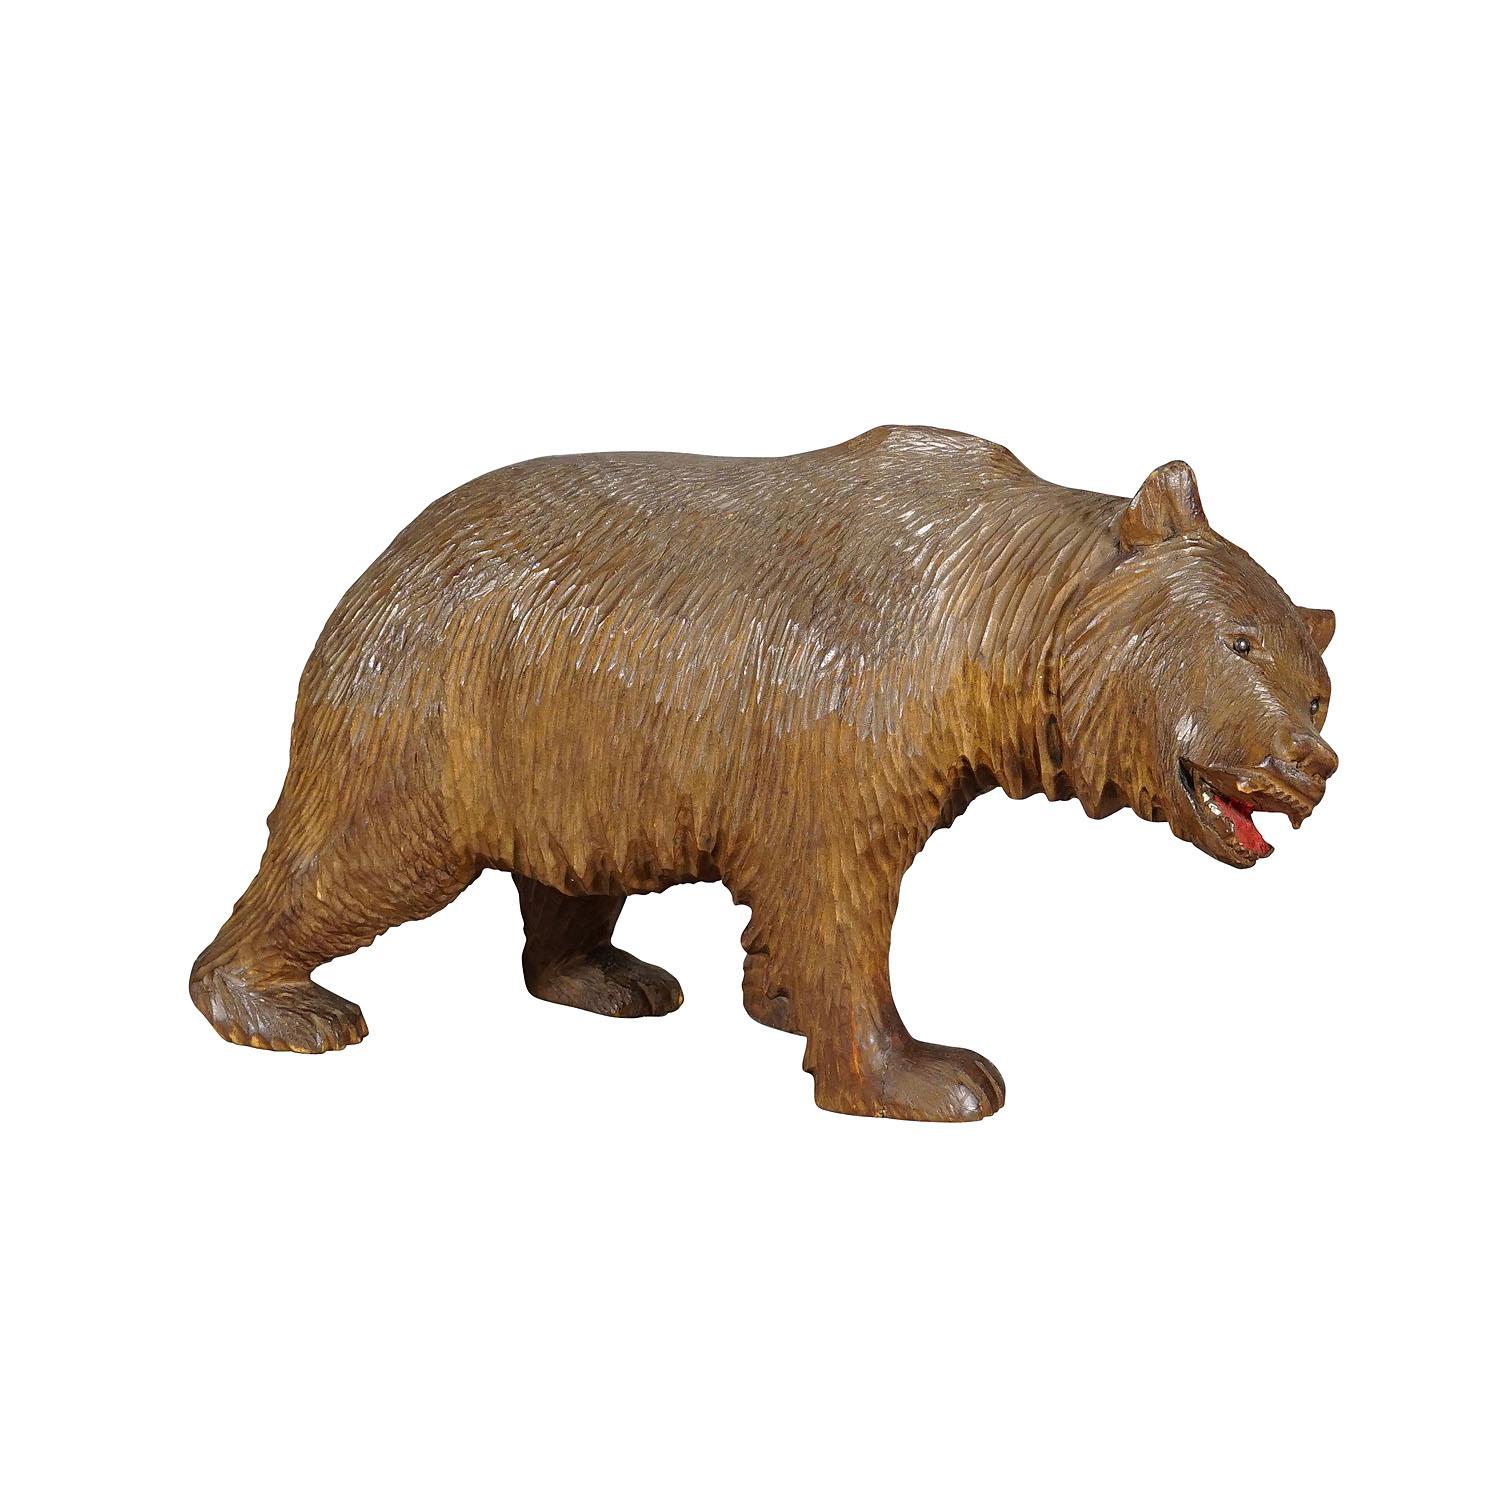 Large Vintage Wooden Strolling Bear Handcarved in Brienz ca. 1930s.

A large vintage statue of a walking bear. Made of lindenwood, finely handcarved with naturalistic details in Brienz, Switzerland ca. 1930s. A nice example of the famous Black